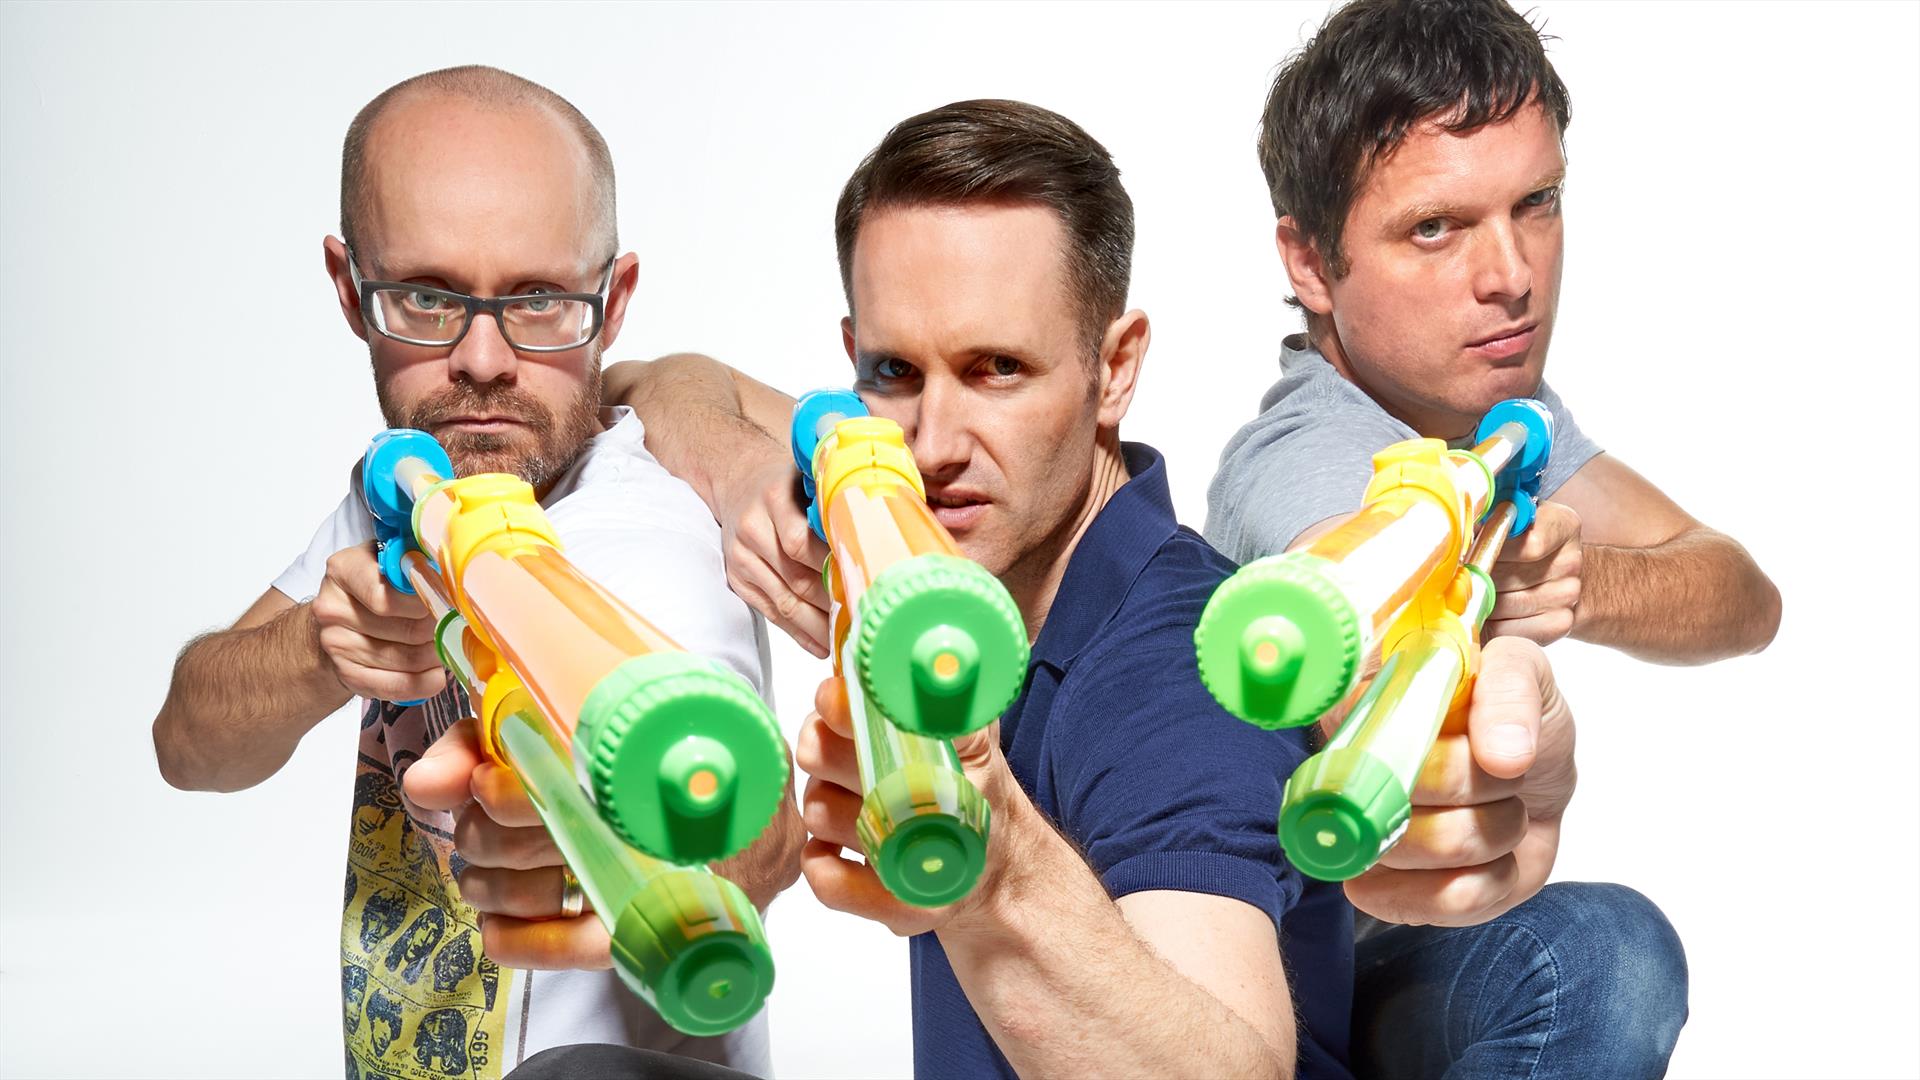 Band Ash with water pistols